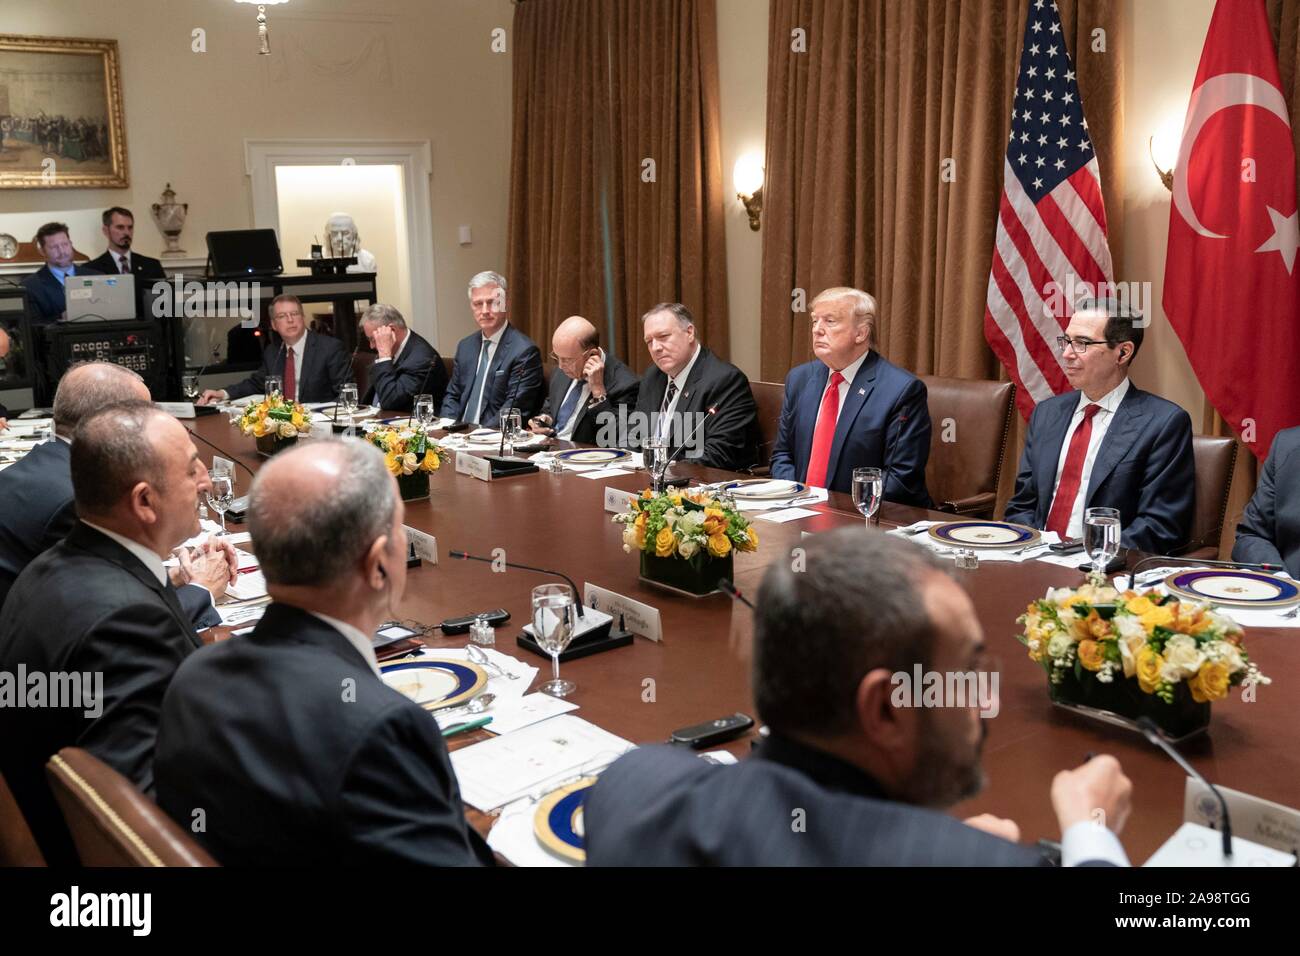 Washington, United States of America. 13 November, 2019. U.S President Donald Trump and Turkish President Recep Tayyip Erdogan hold and expanded bilateral meeting in the Cabinet Room of the White House November 13, 2019 in Washington, DC.  Credit: Shealah Craighead/White House Photo/Alamy Live News Stock Photo